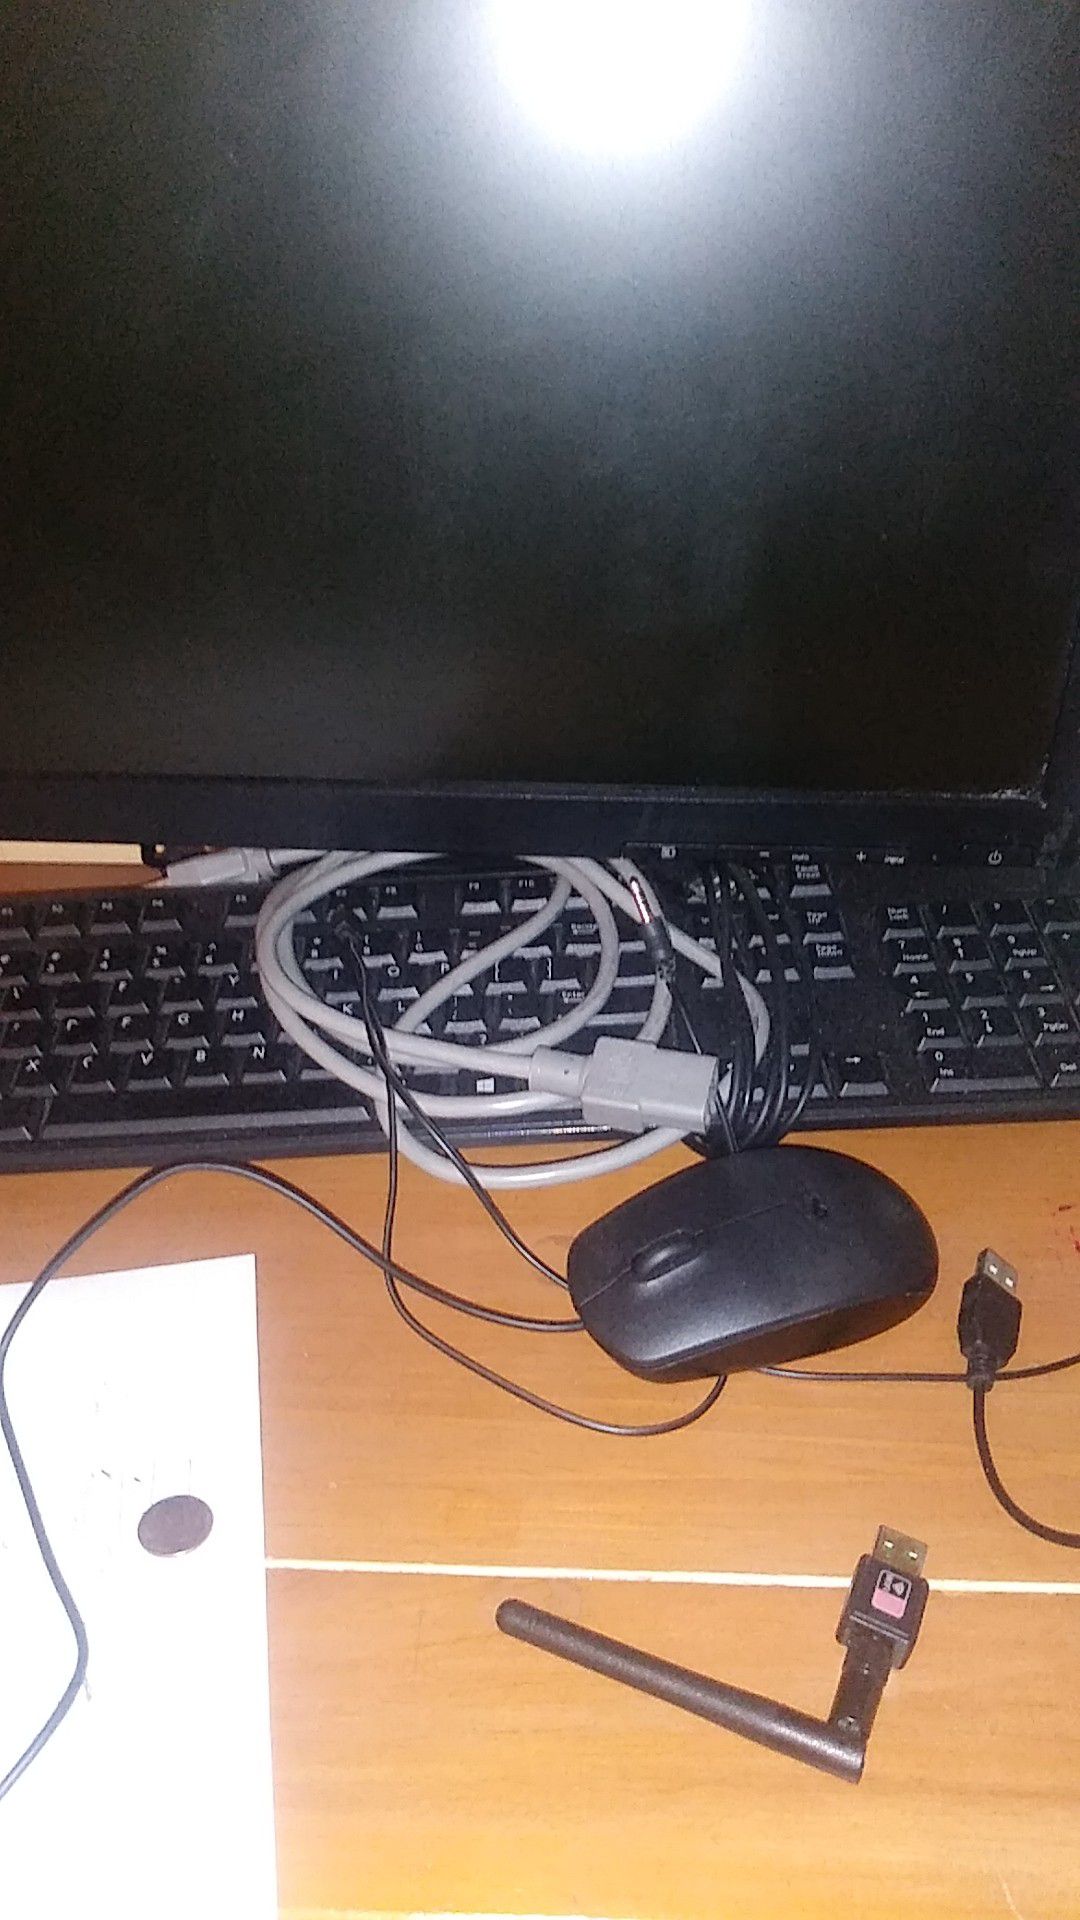 Hp monitor and Dell mouse and keyboard and Wi-Fi USB stick